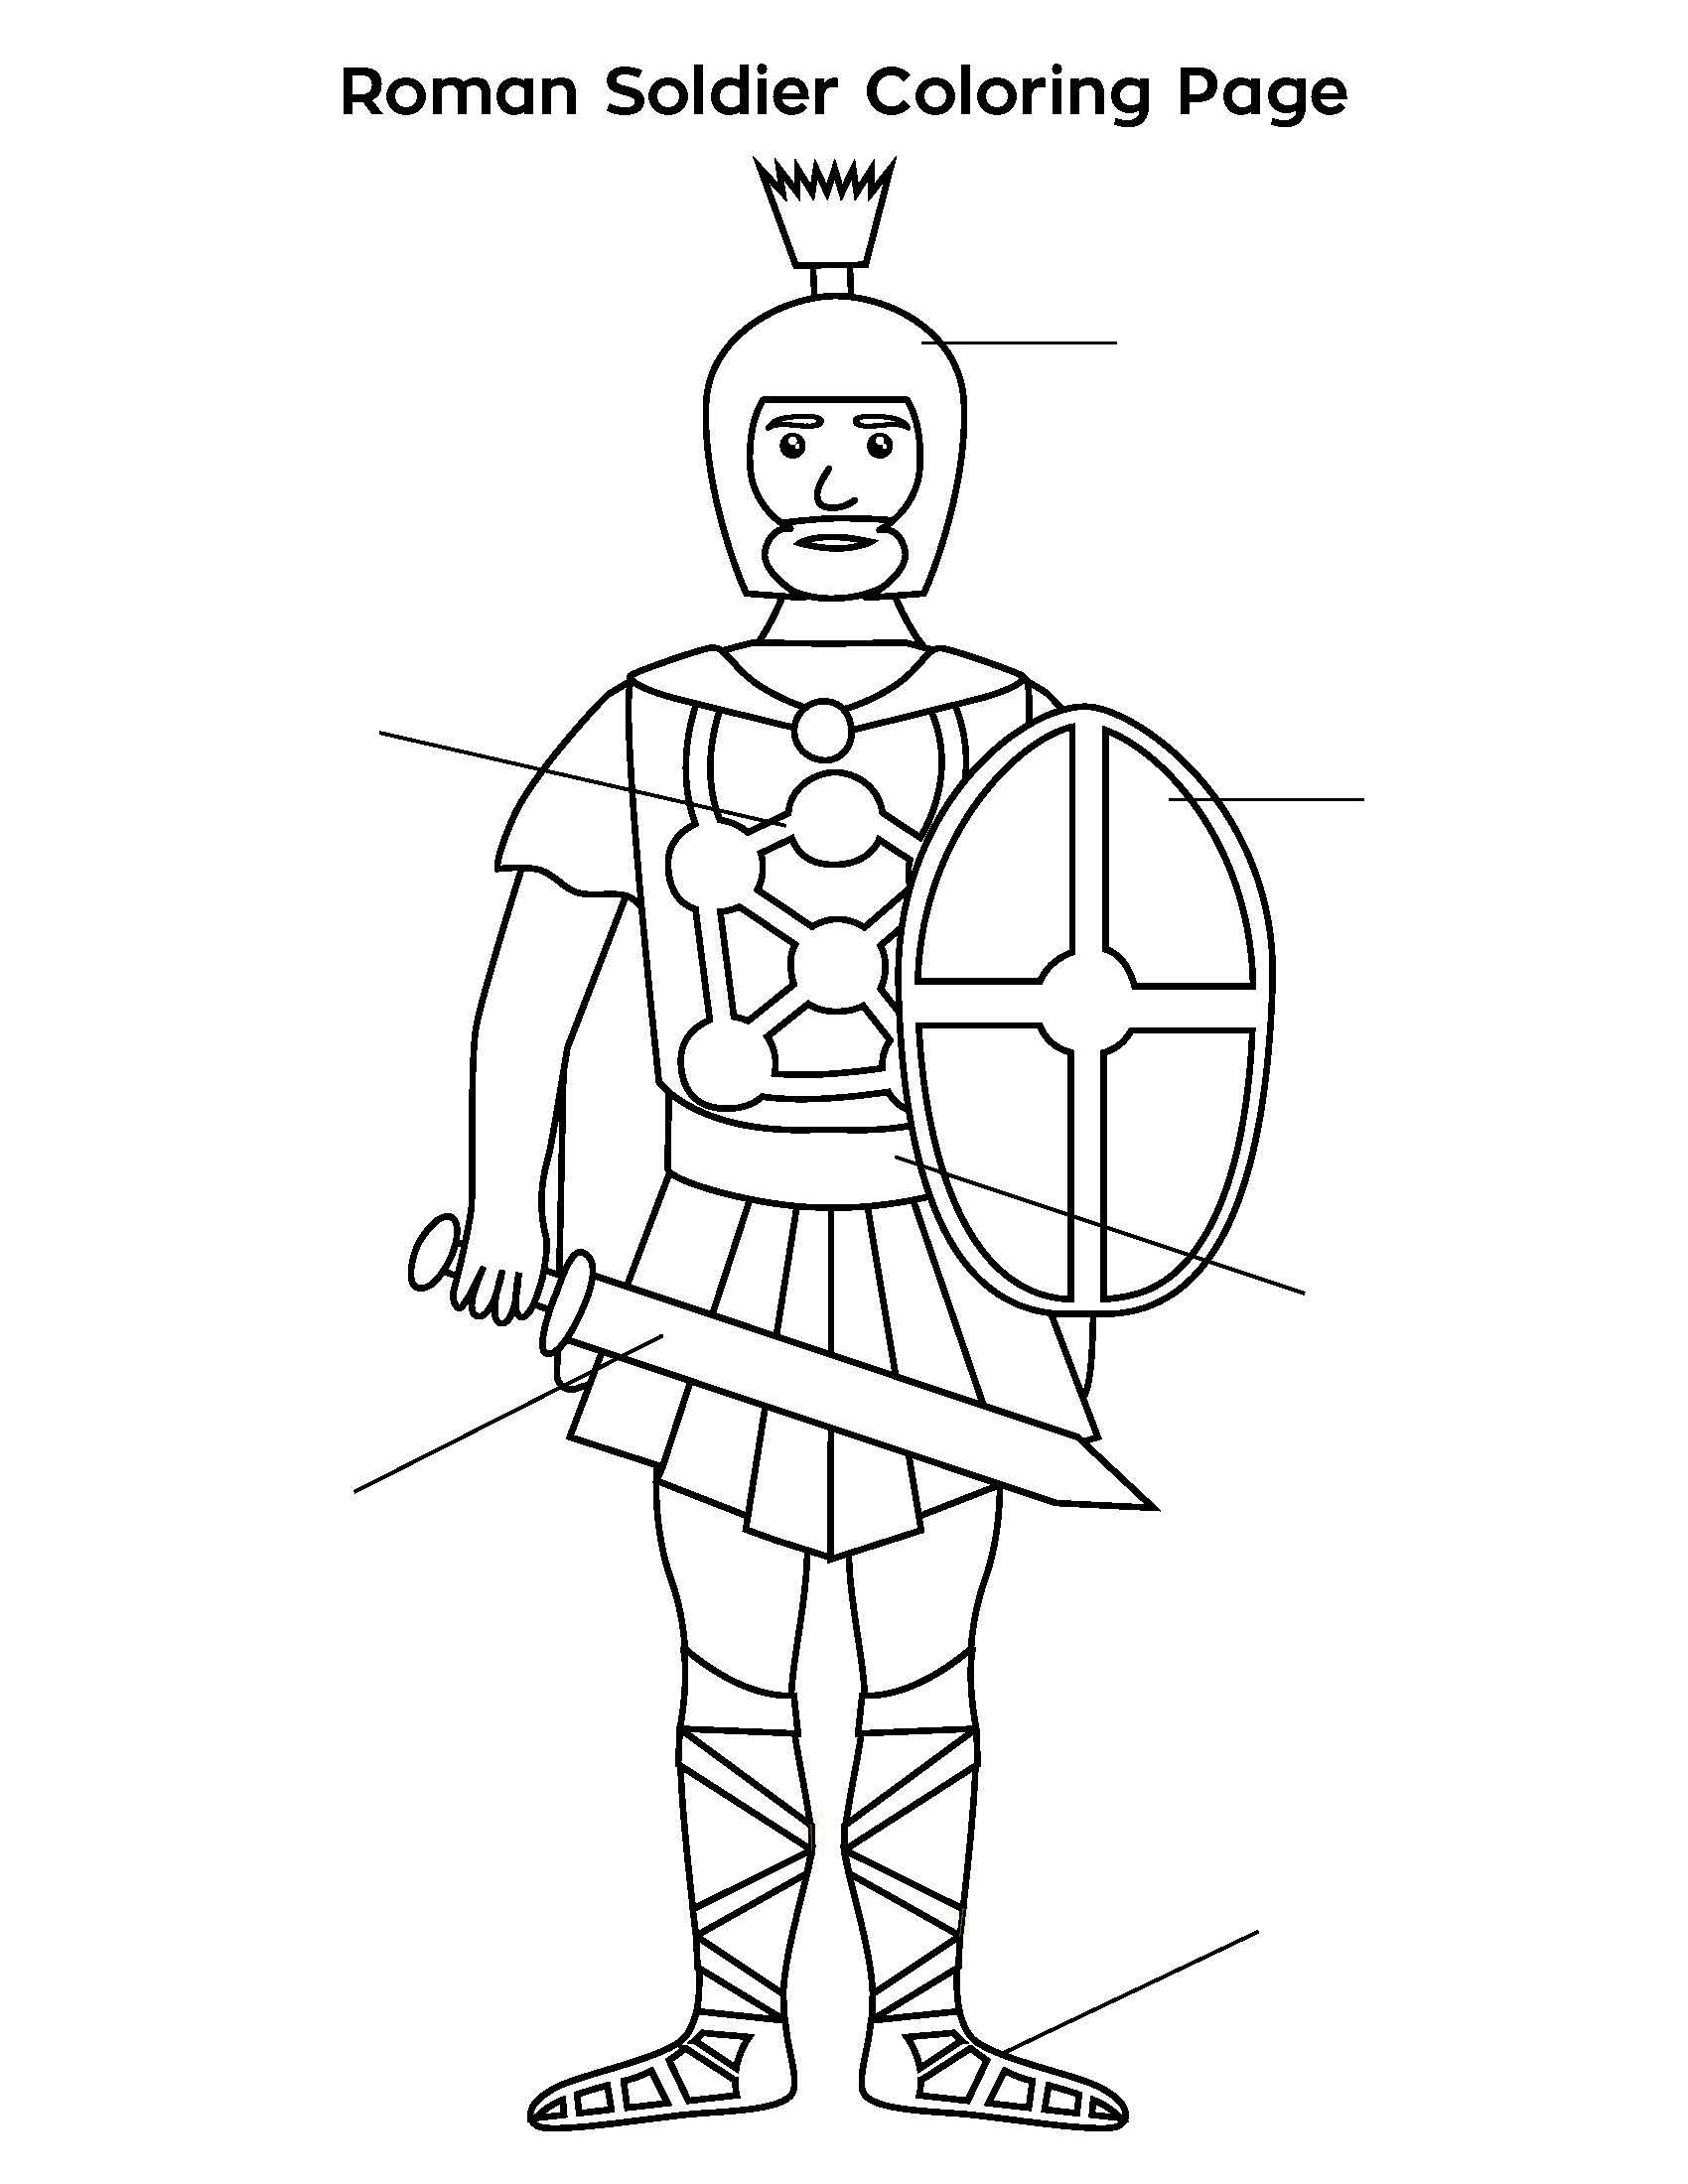 Roman soldier loring page roman soldiers loring pages loring pages for kids